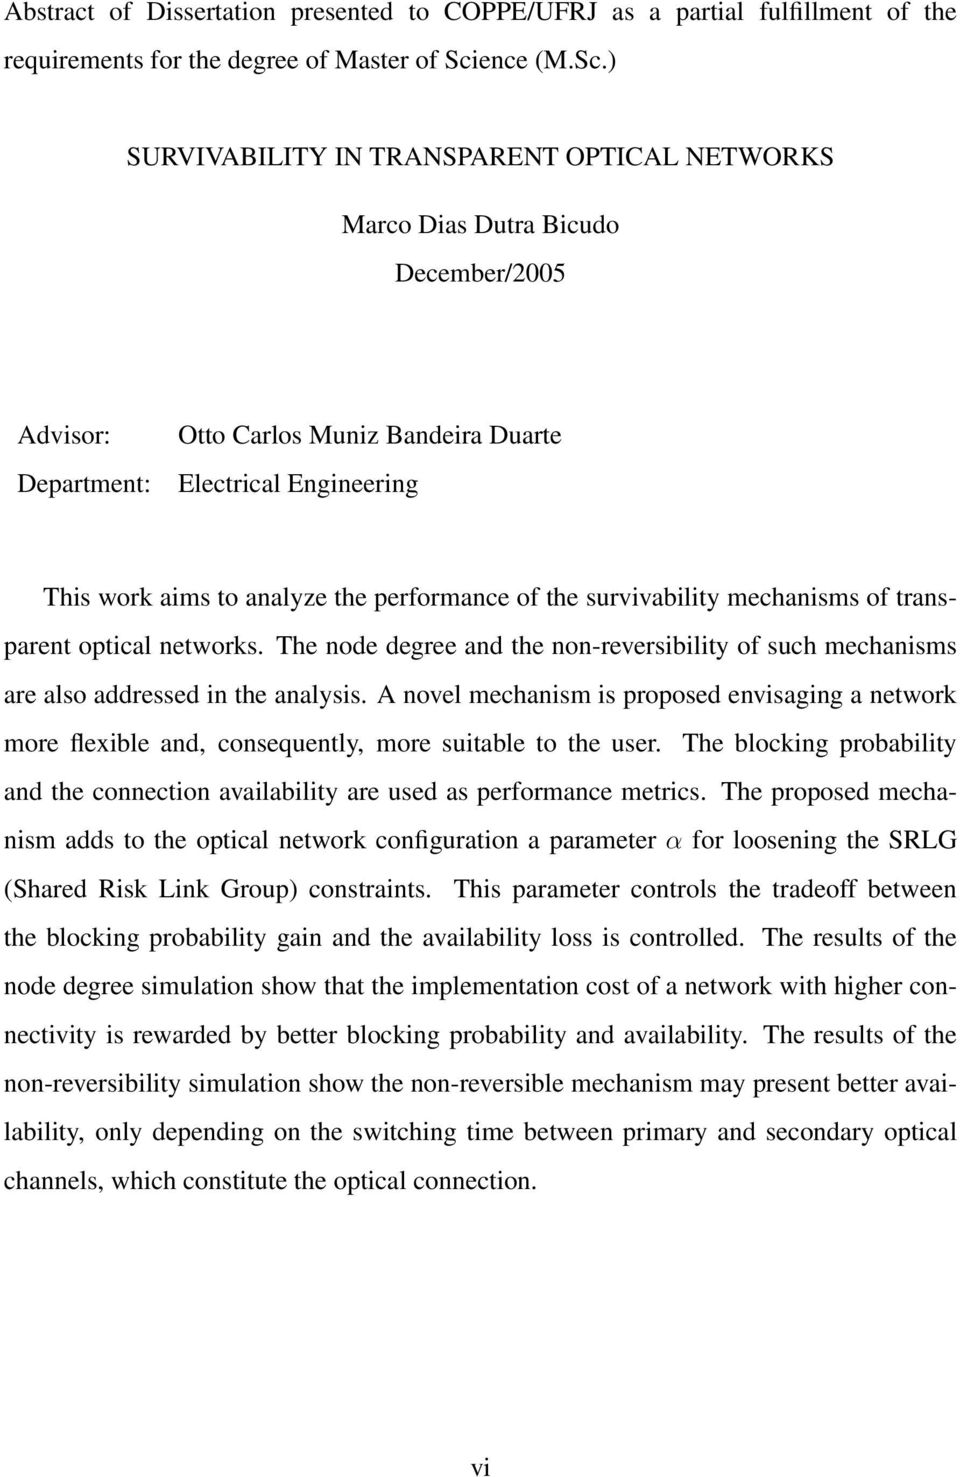 ) SURVIVABILITY IN TRANSPARENT OPTICAL NETWORKS Marco Dias Dutra Bicudo December/2005 Advisor: Department: Otto Carlos Muniz Bandeira Duarte Electrical Engineering This work aims to analyze the